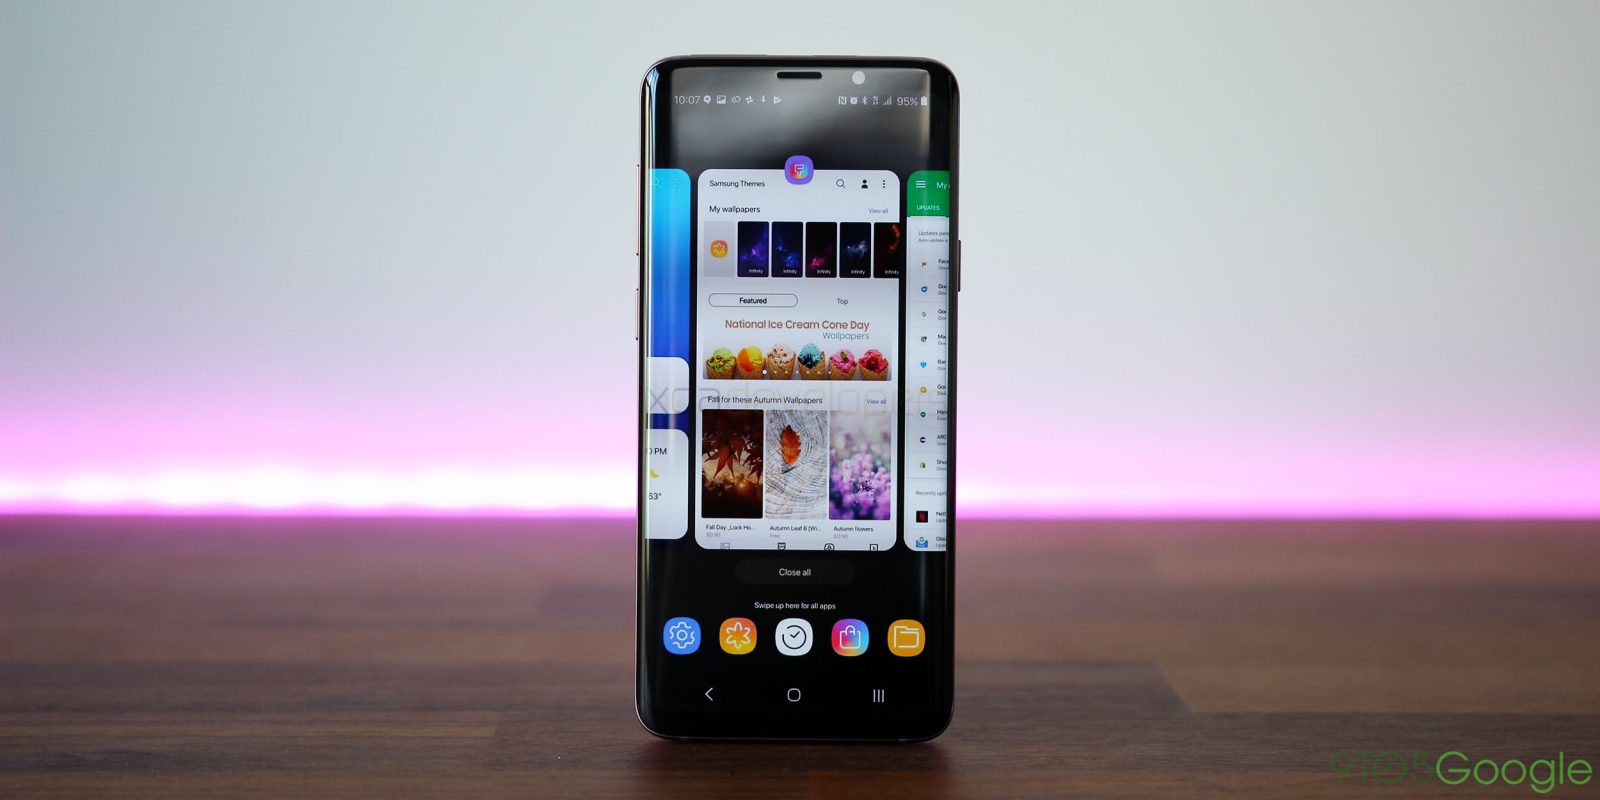 Here's an early look at Android 9 Pie on Galaxy S9+ - 9to5Google